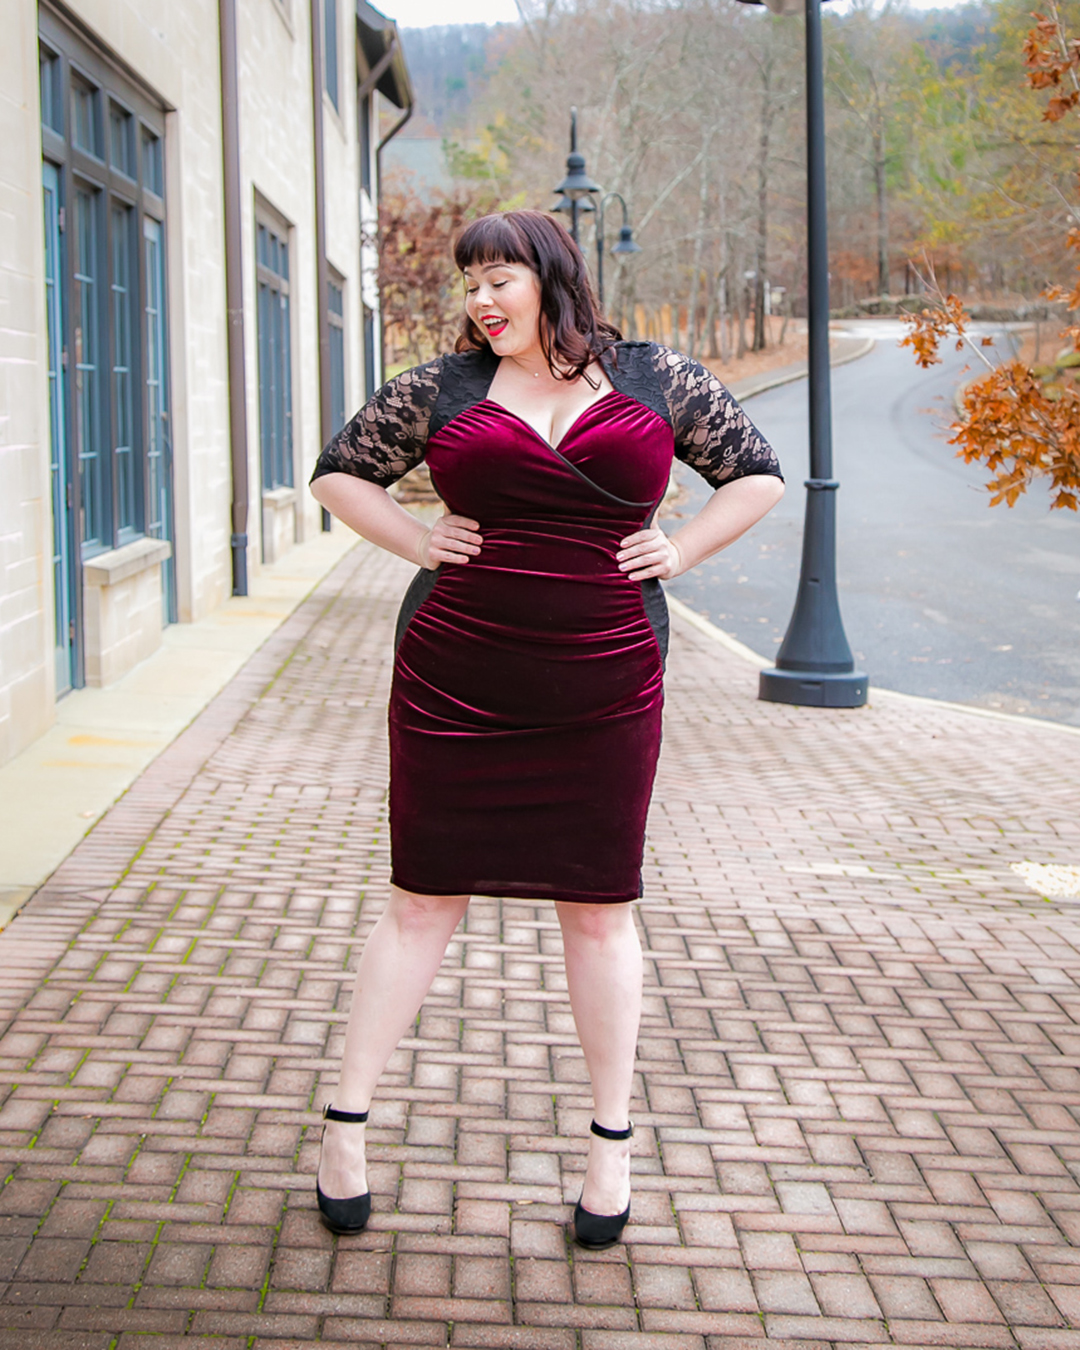 Kiyonna, Hourglass Lace Dress, velvet, Chicago Blogger, Chicago Plus Size Model, Amber McCulloch, Fashion Blogger, Style Plus Curves